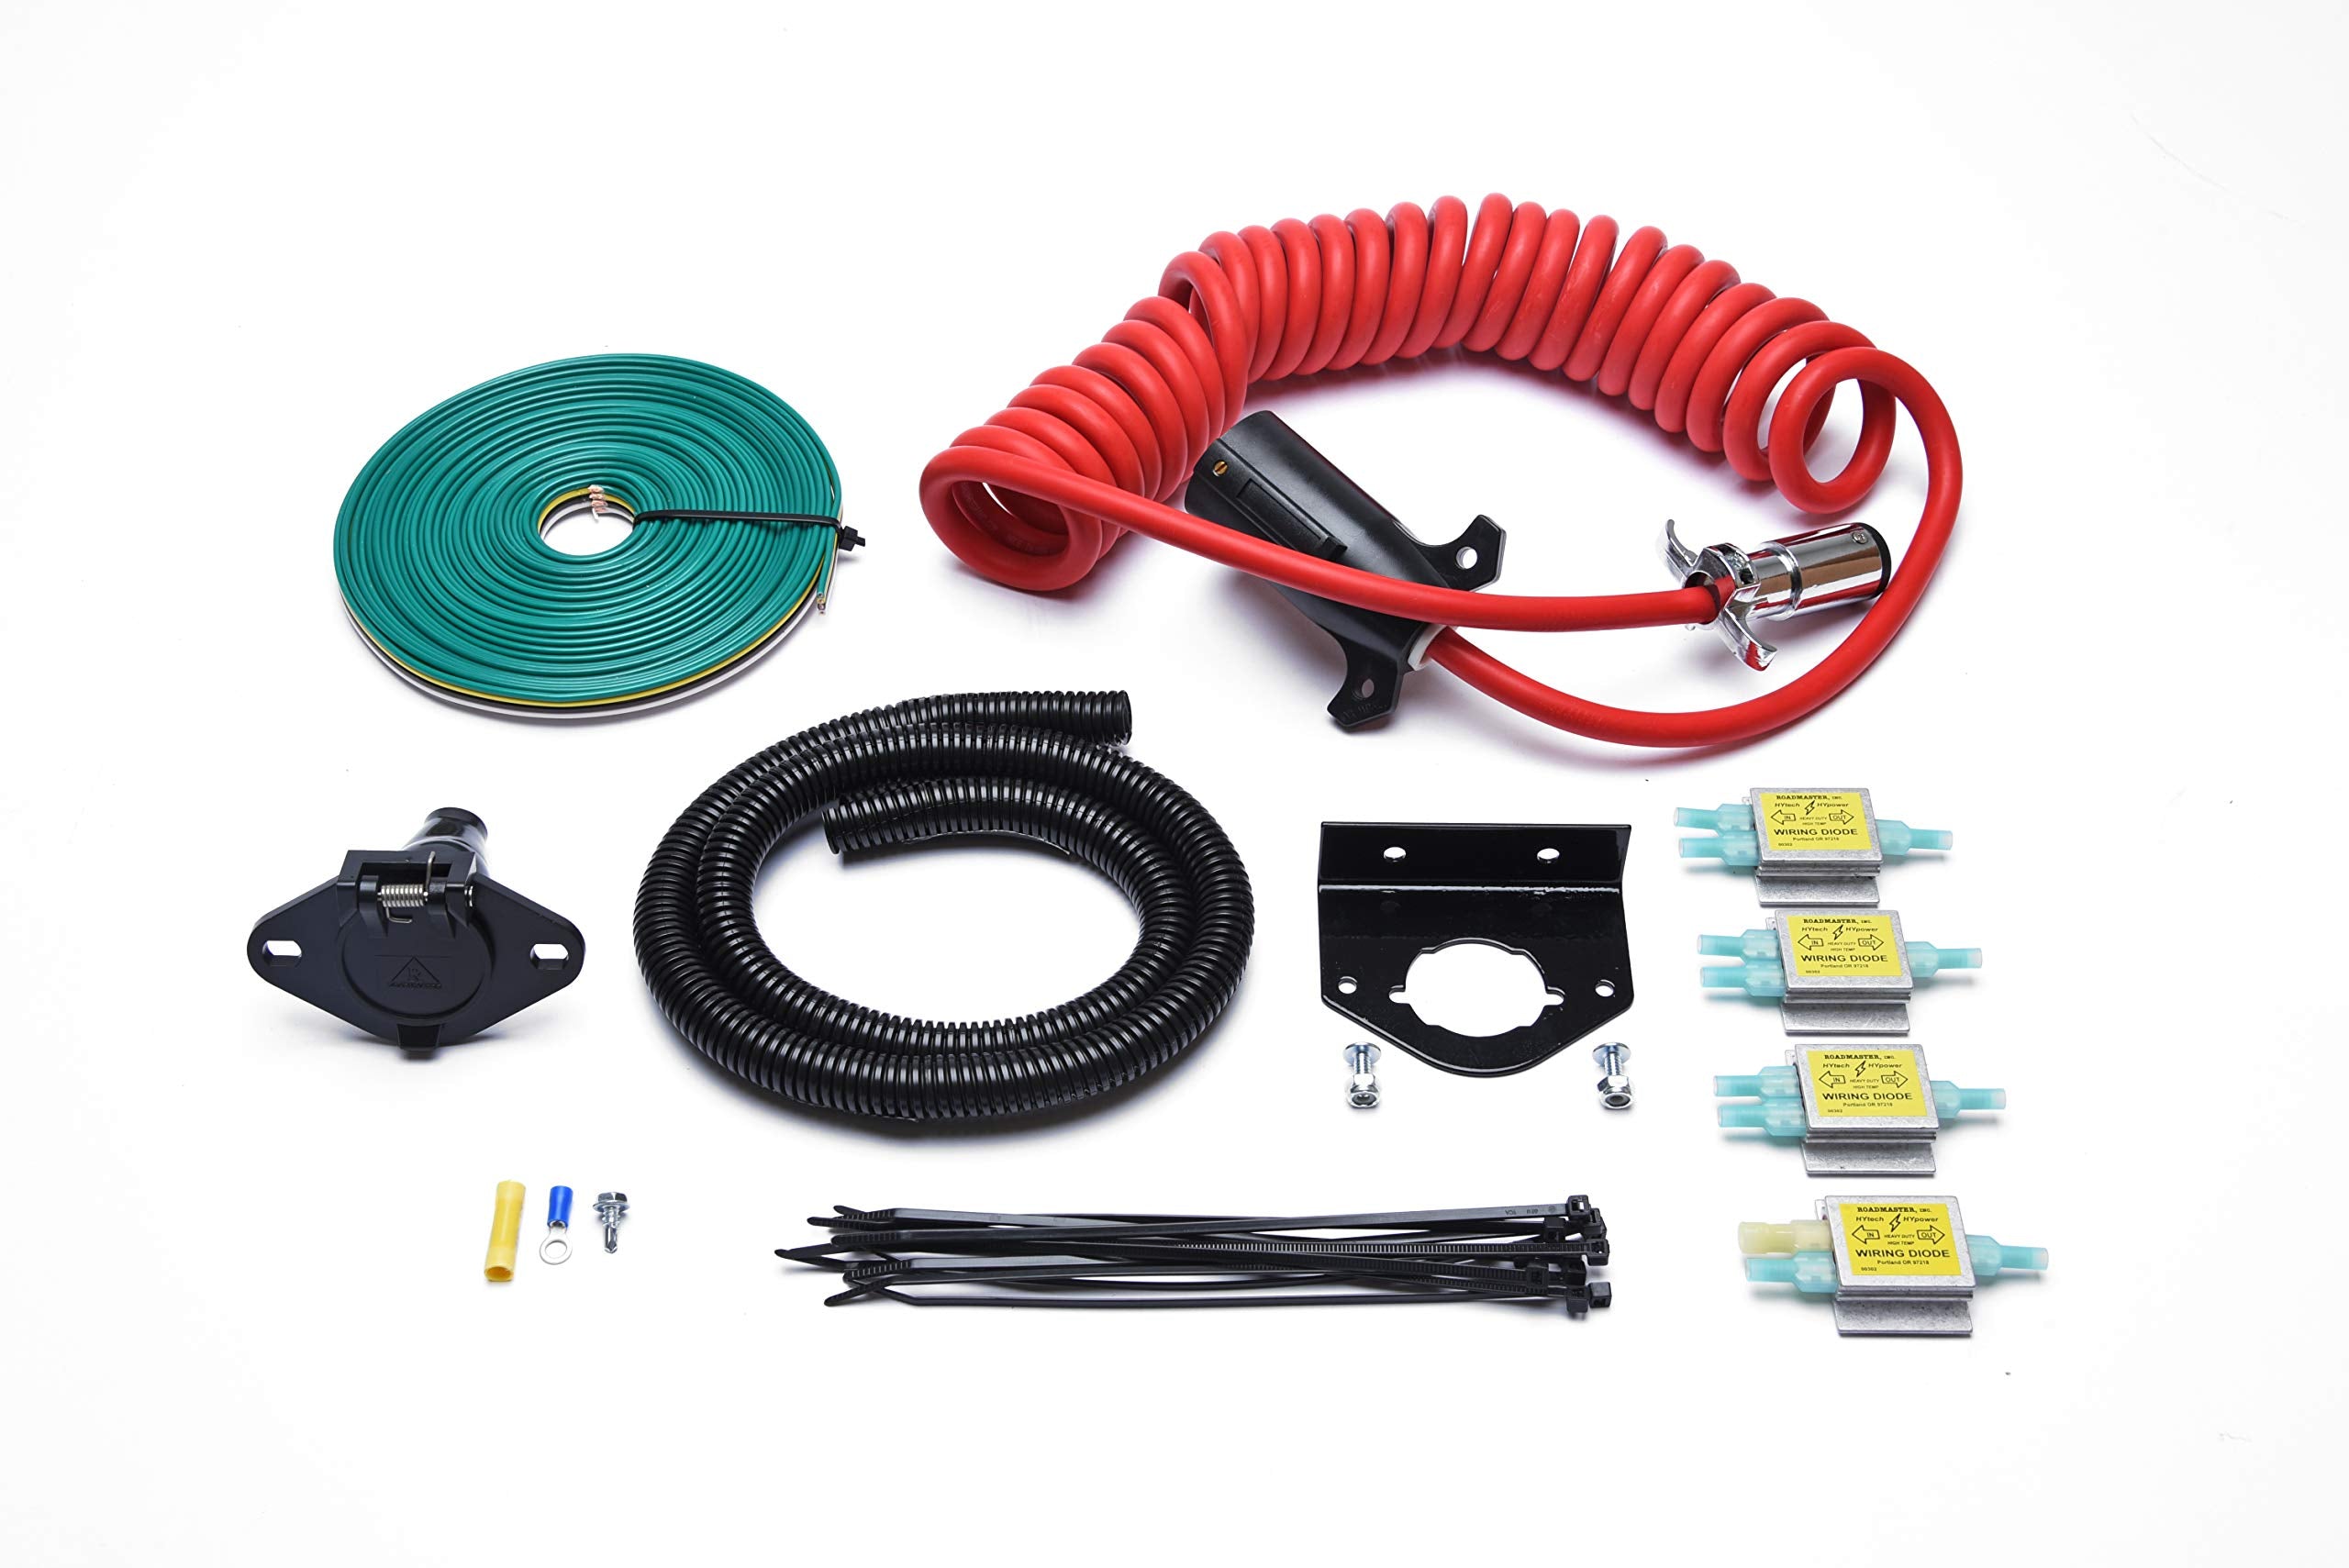 Roadmaster 15267 All-In-One Towed Vehicle Wiring Kit for 6- to 7-wire Towing Combinations